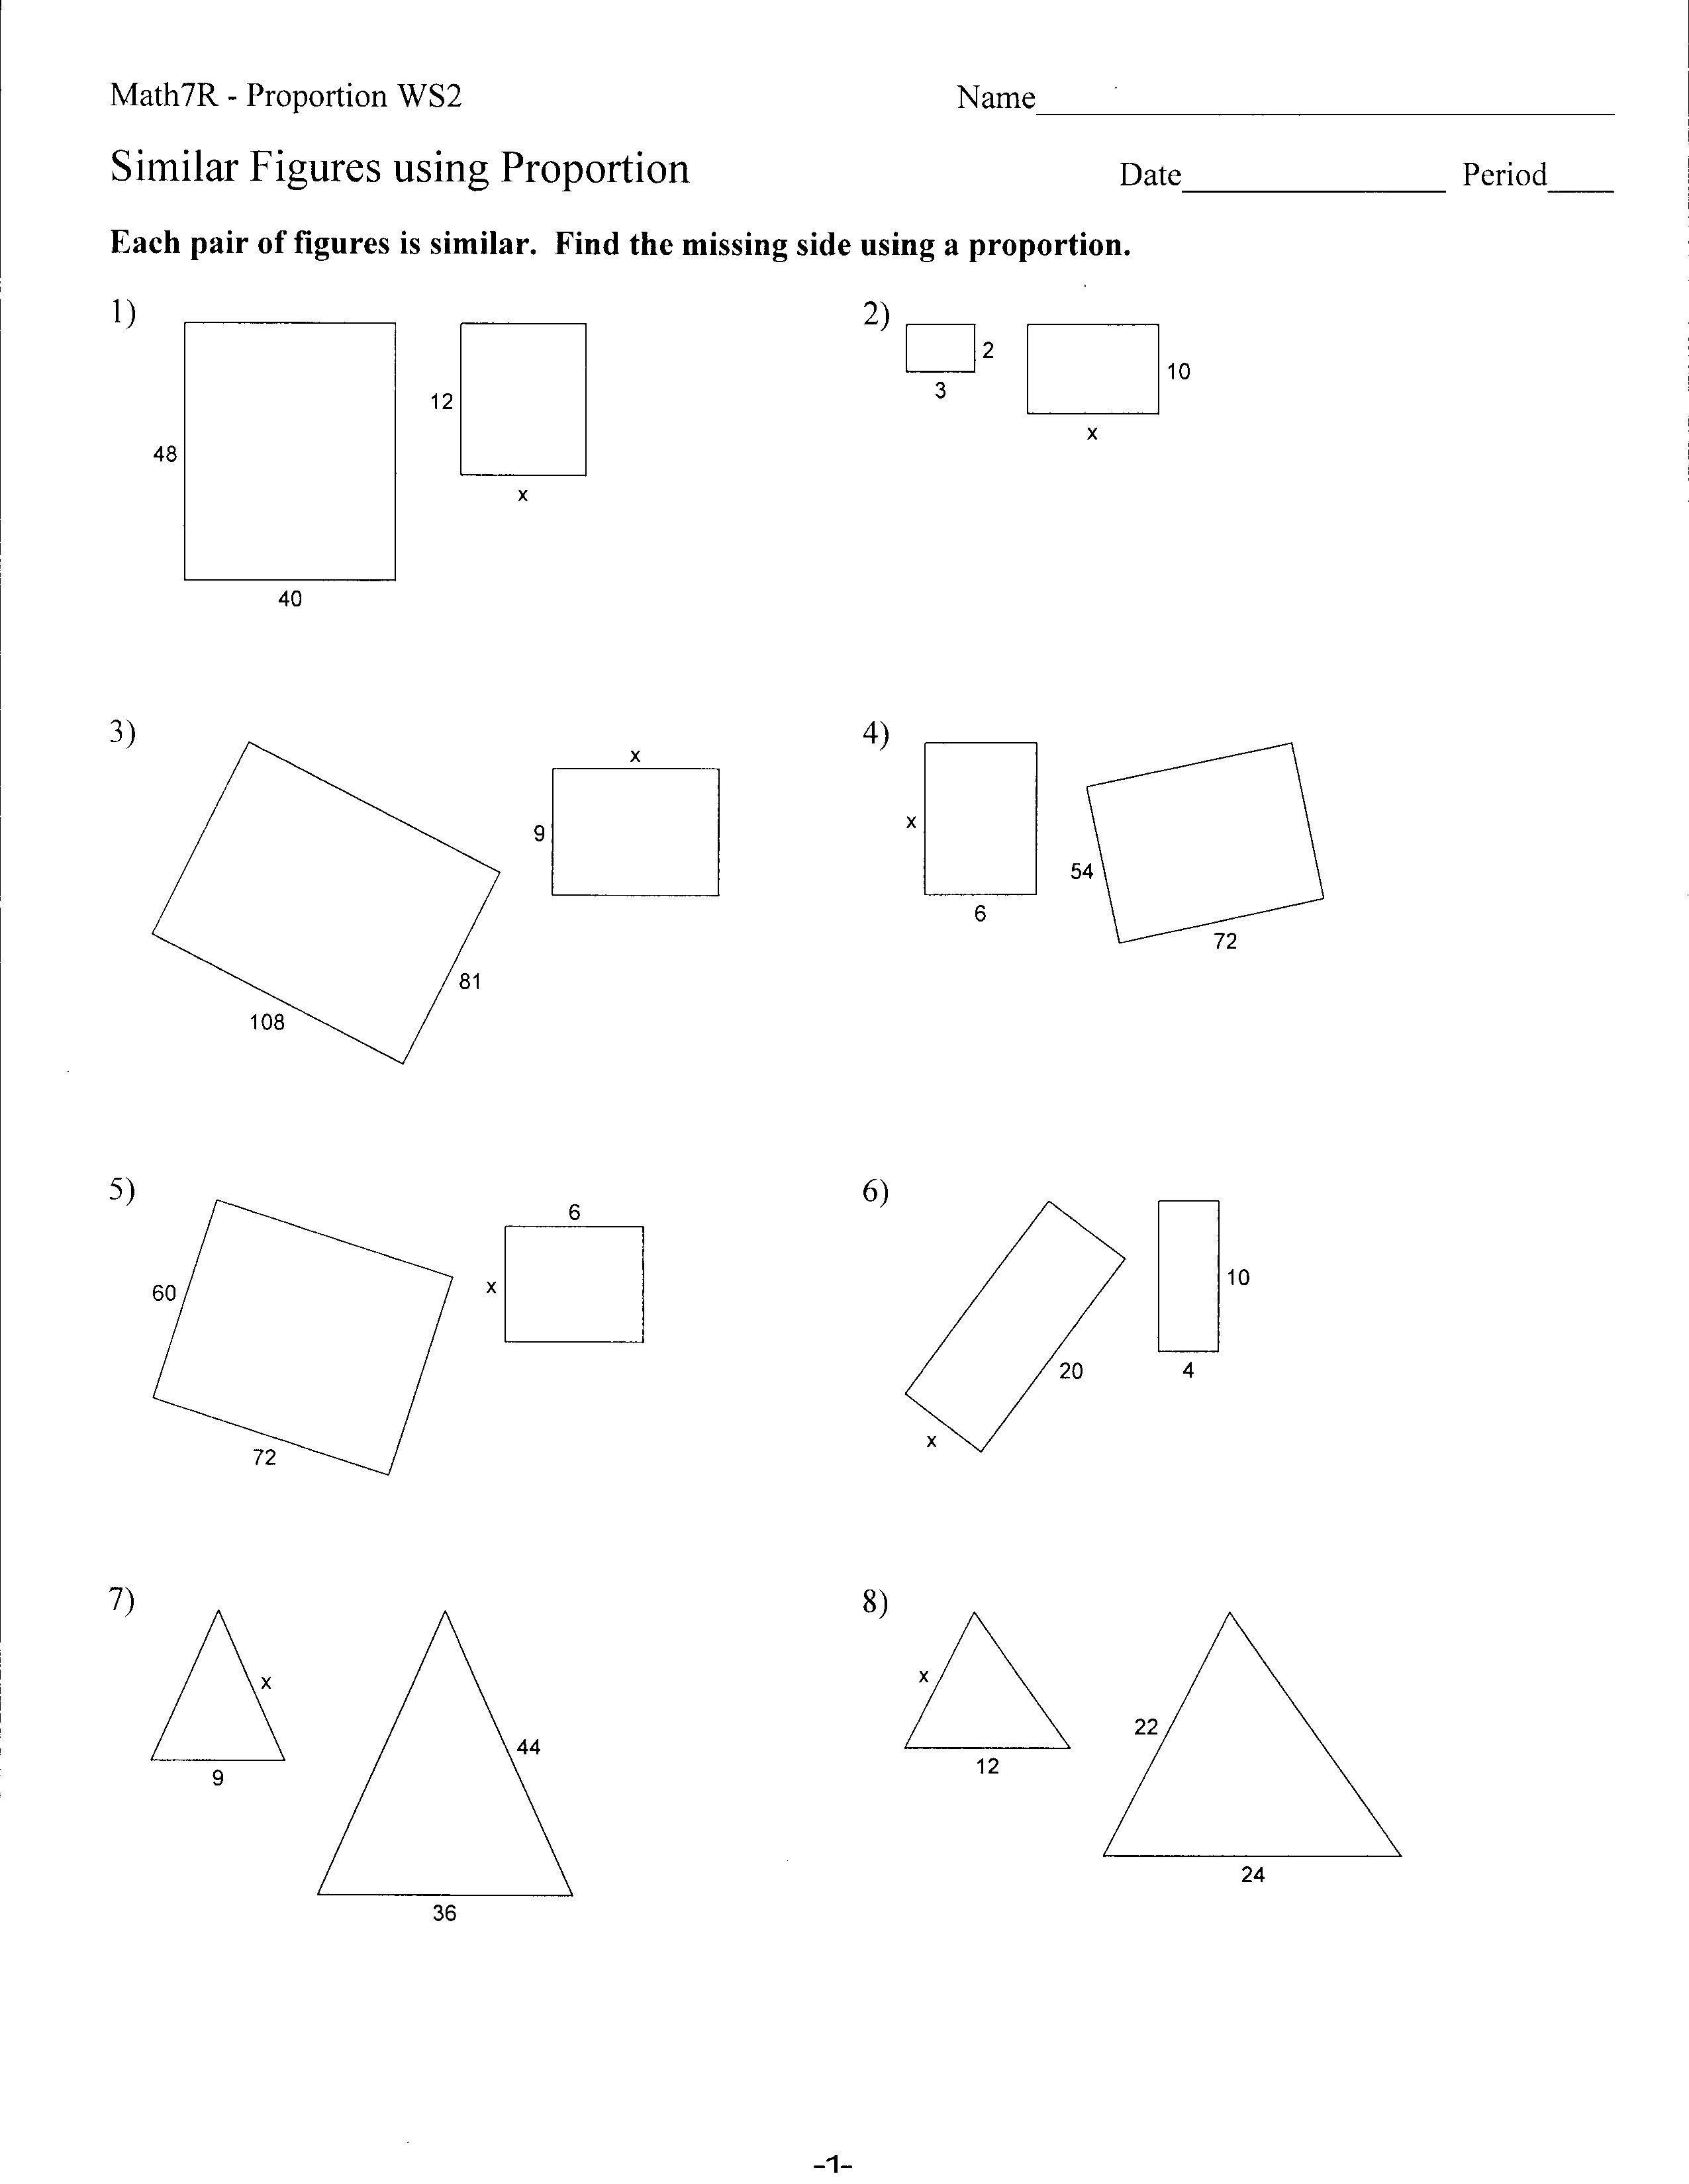 Similar Figures and Proportions Worksheets Image